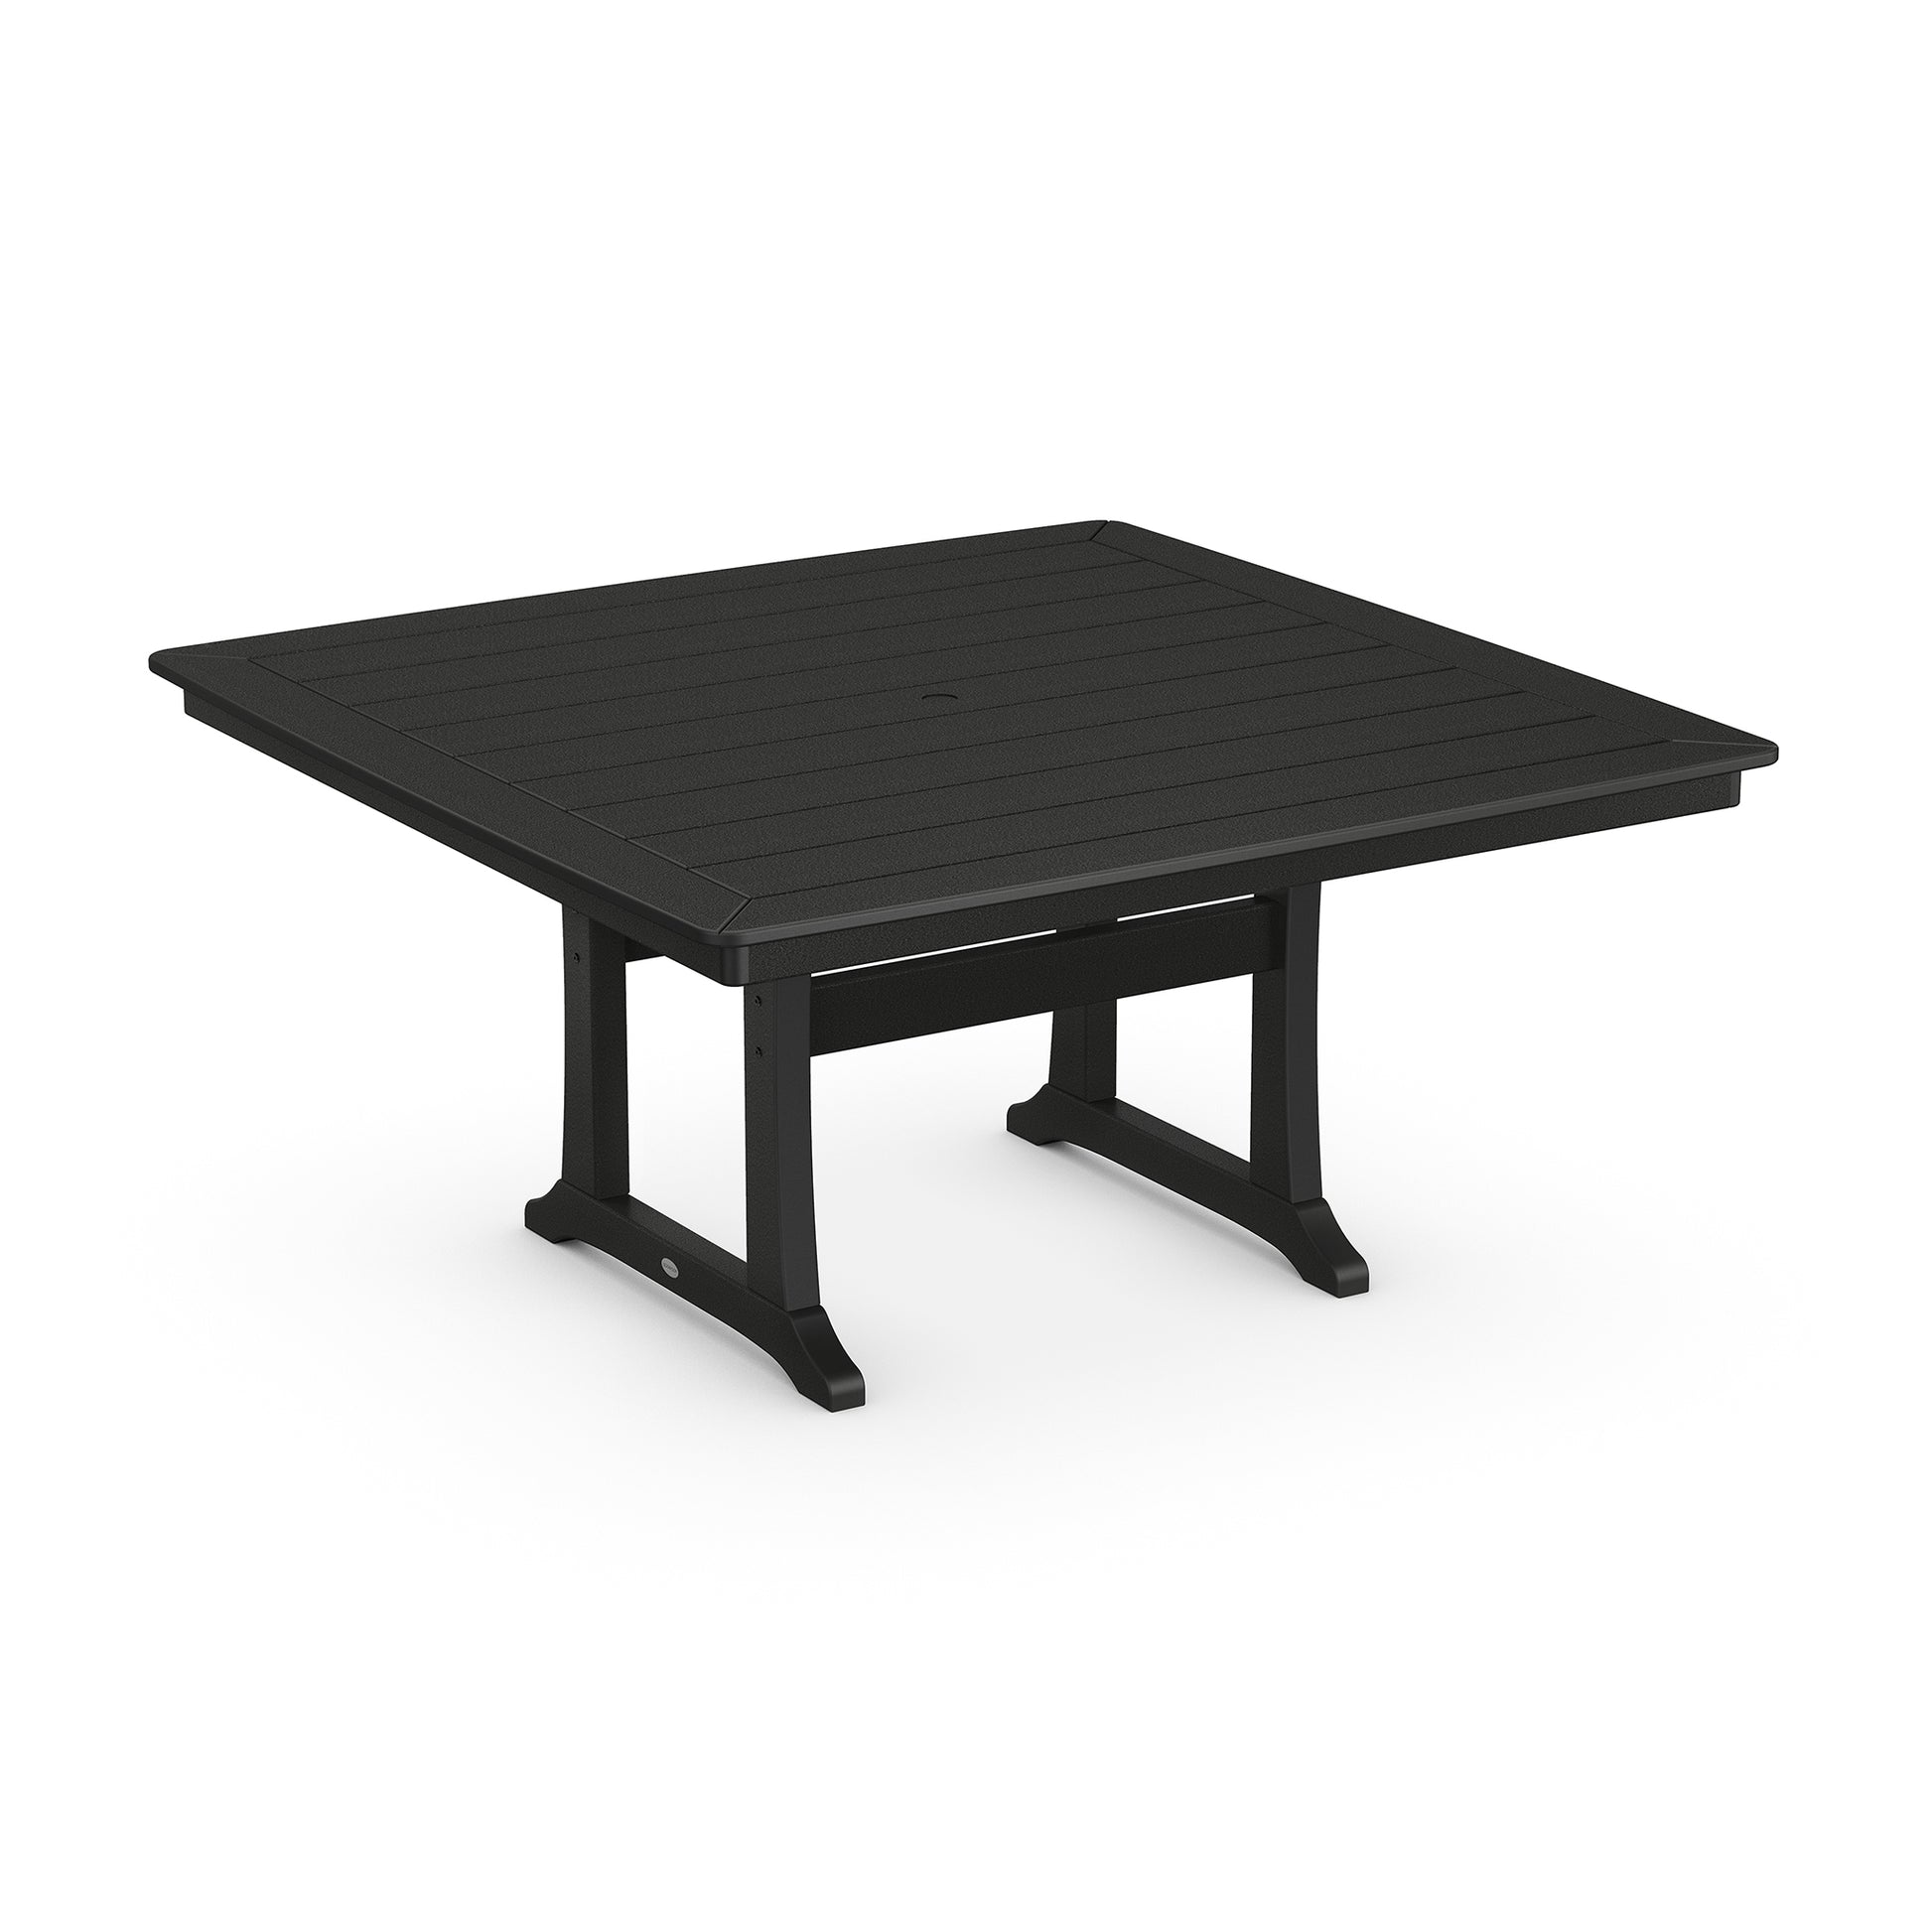 Black square POLYWOOD® Nautical Trestle 59" Dining Table with slatted top and sturdy legs, isolated on a white background.